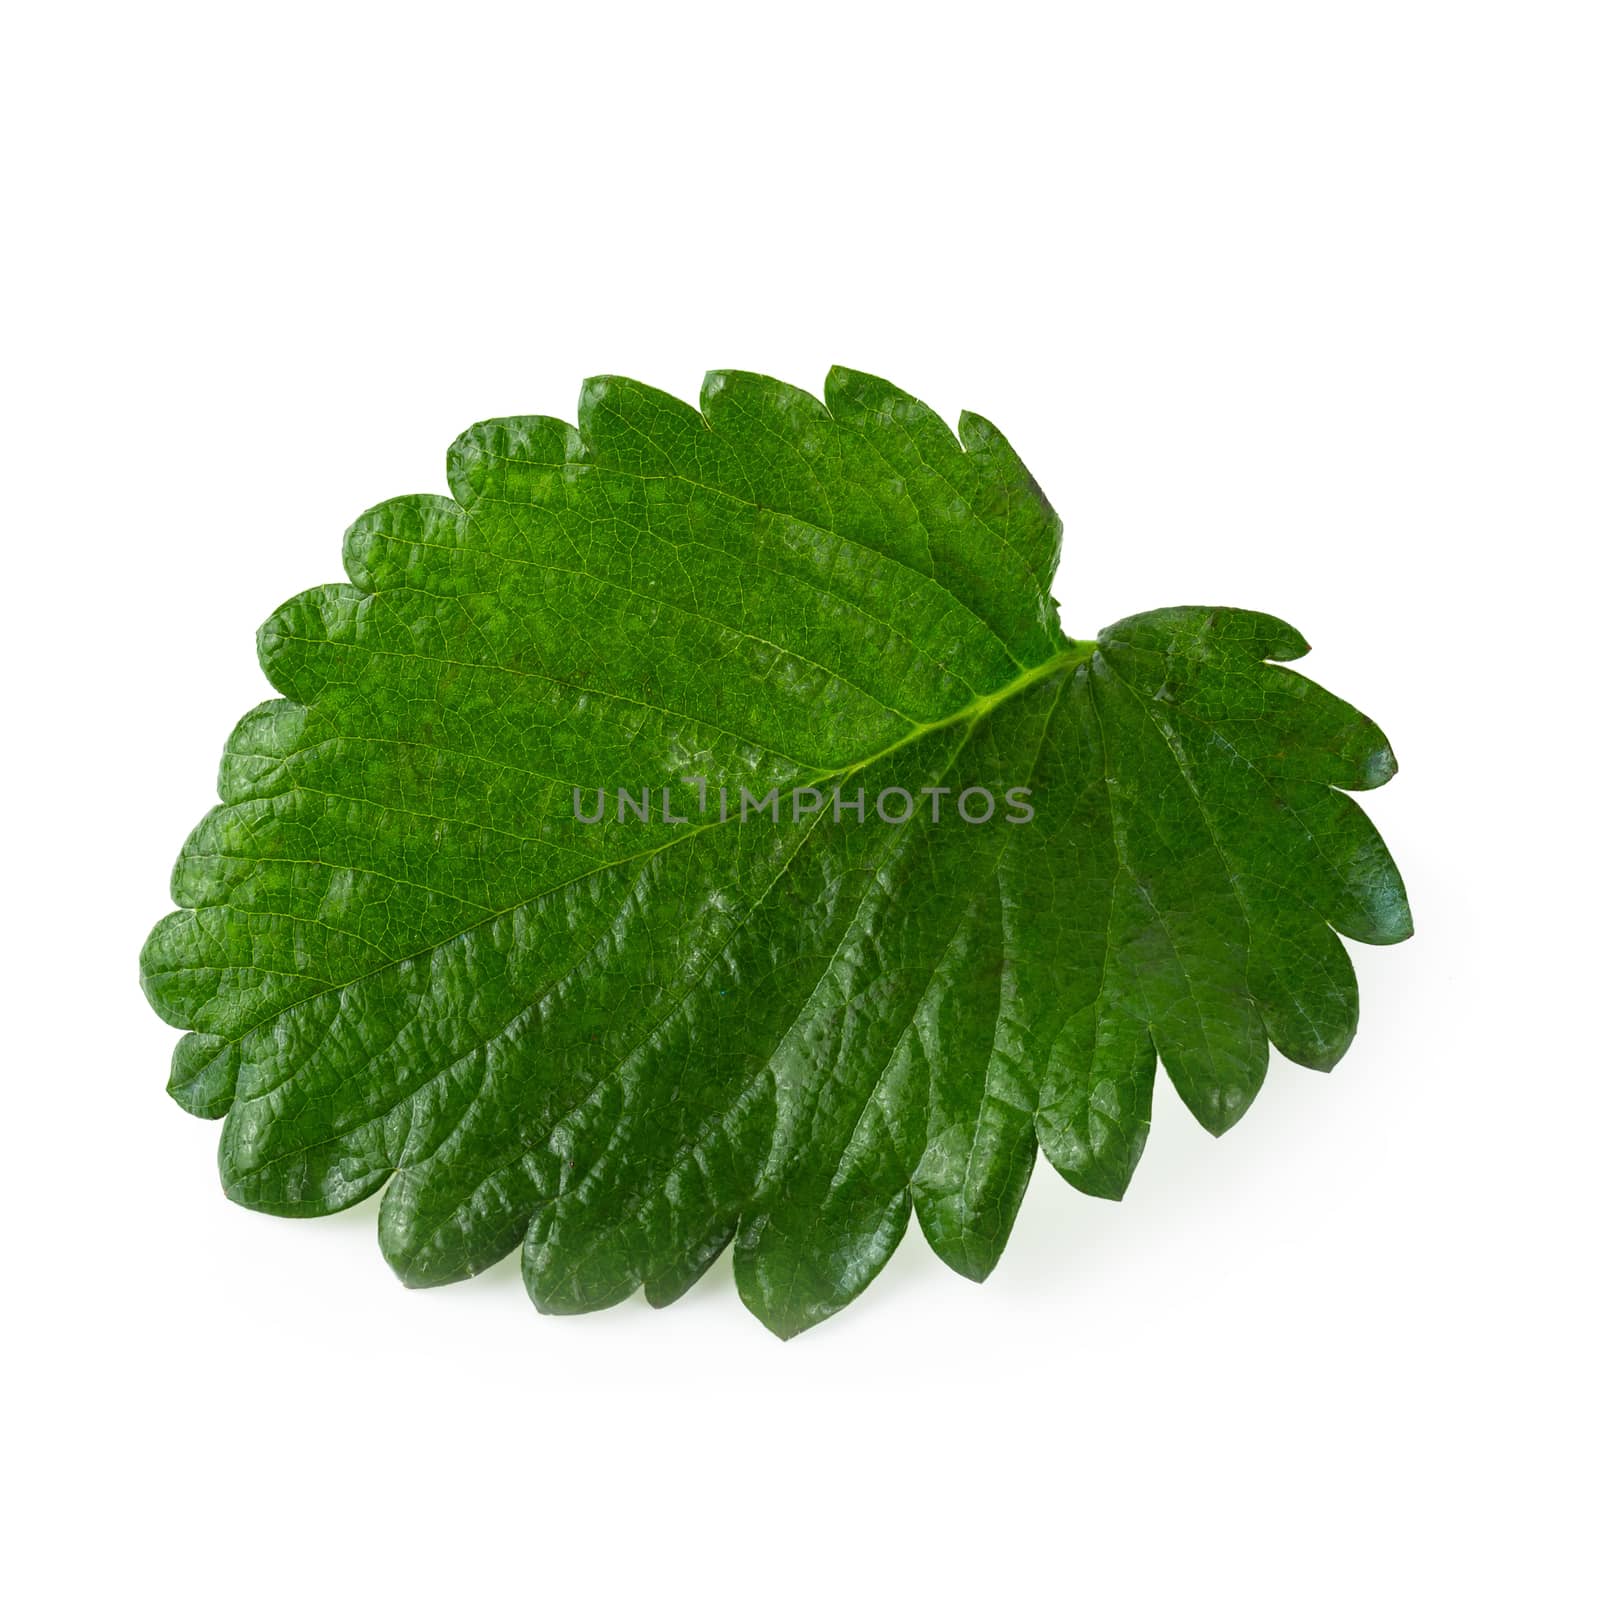 Green Strawberry Leaf isolated over white background by kaiskynet